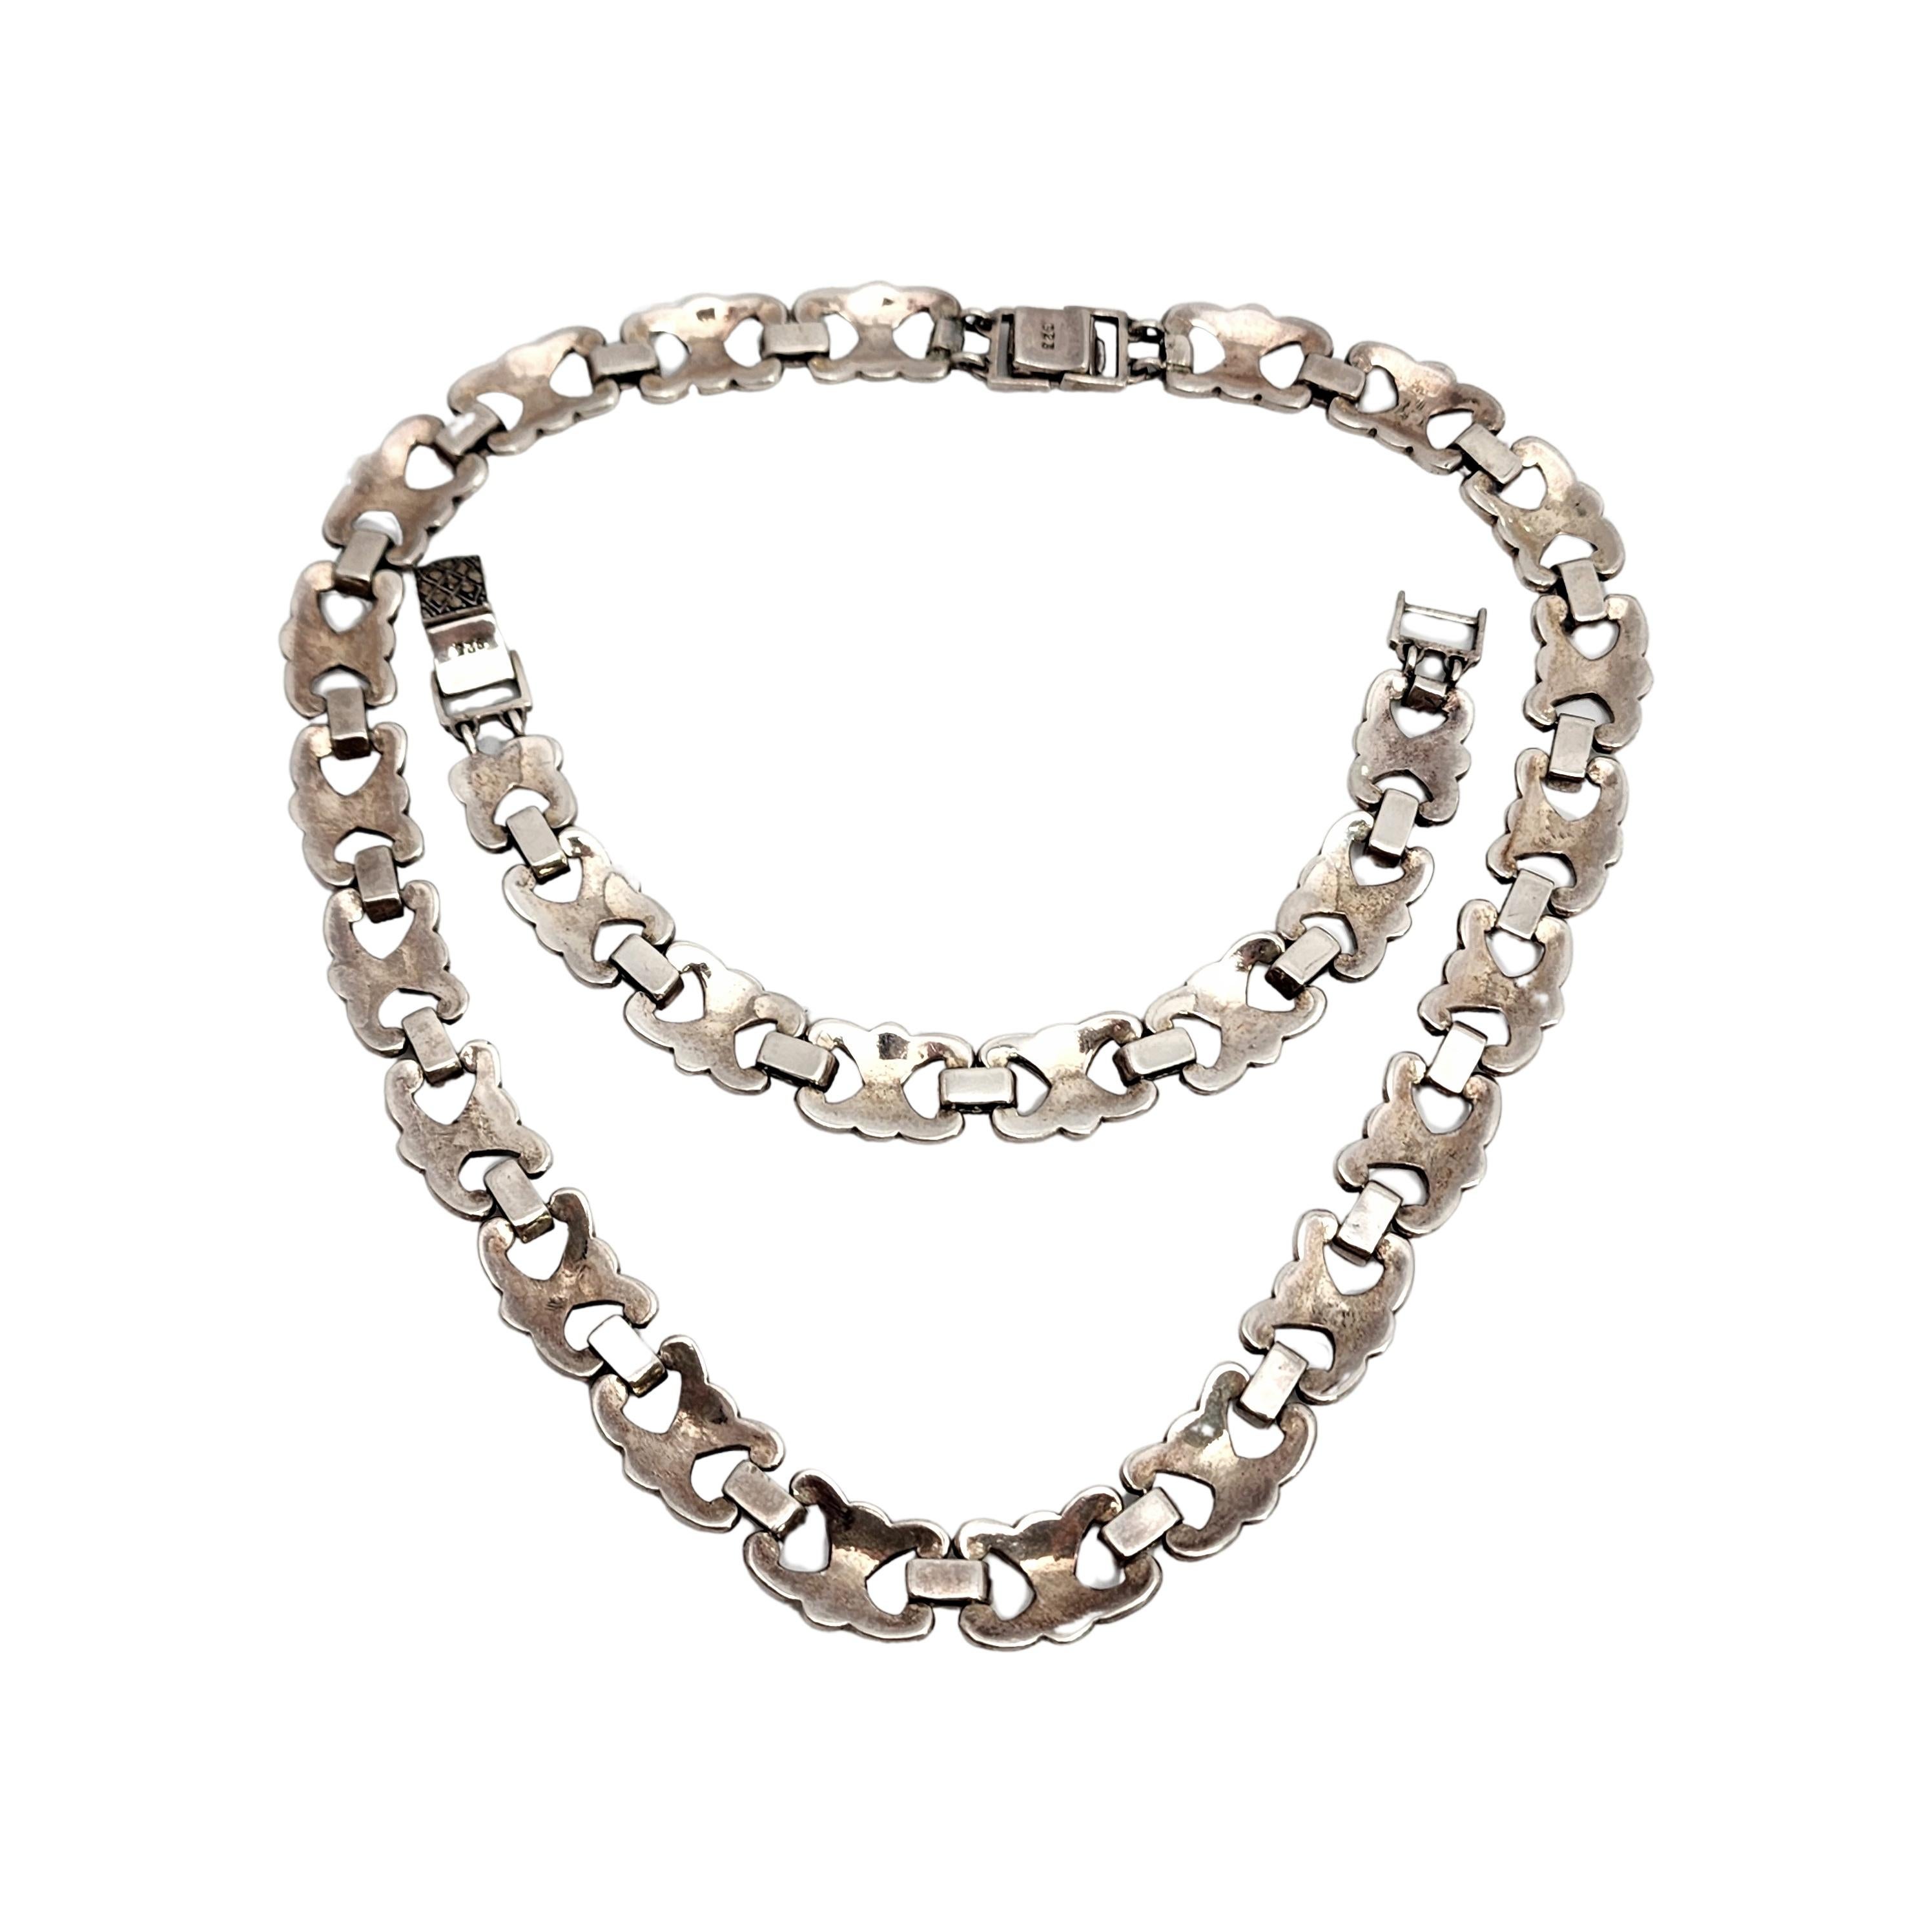 Sterling silver and marcasite necklace and bracelet set.

Both pieces feature marcasite encrusted infinity shaped links and fold over closures.

Necklace measures approx 18